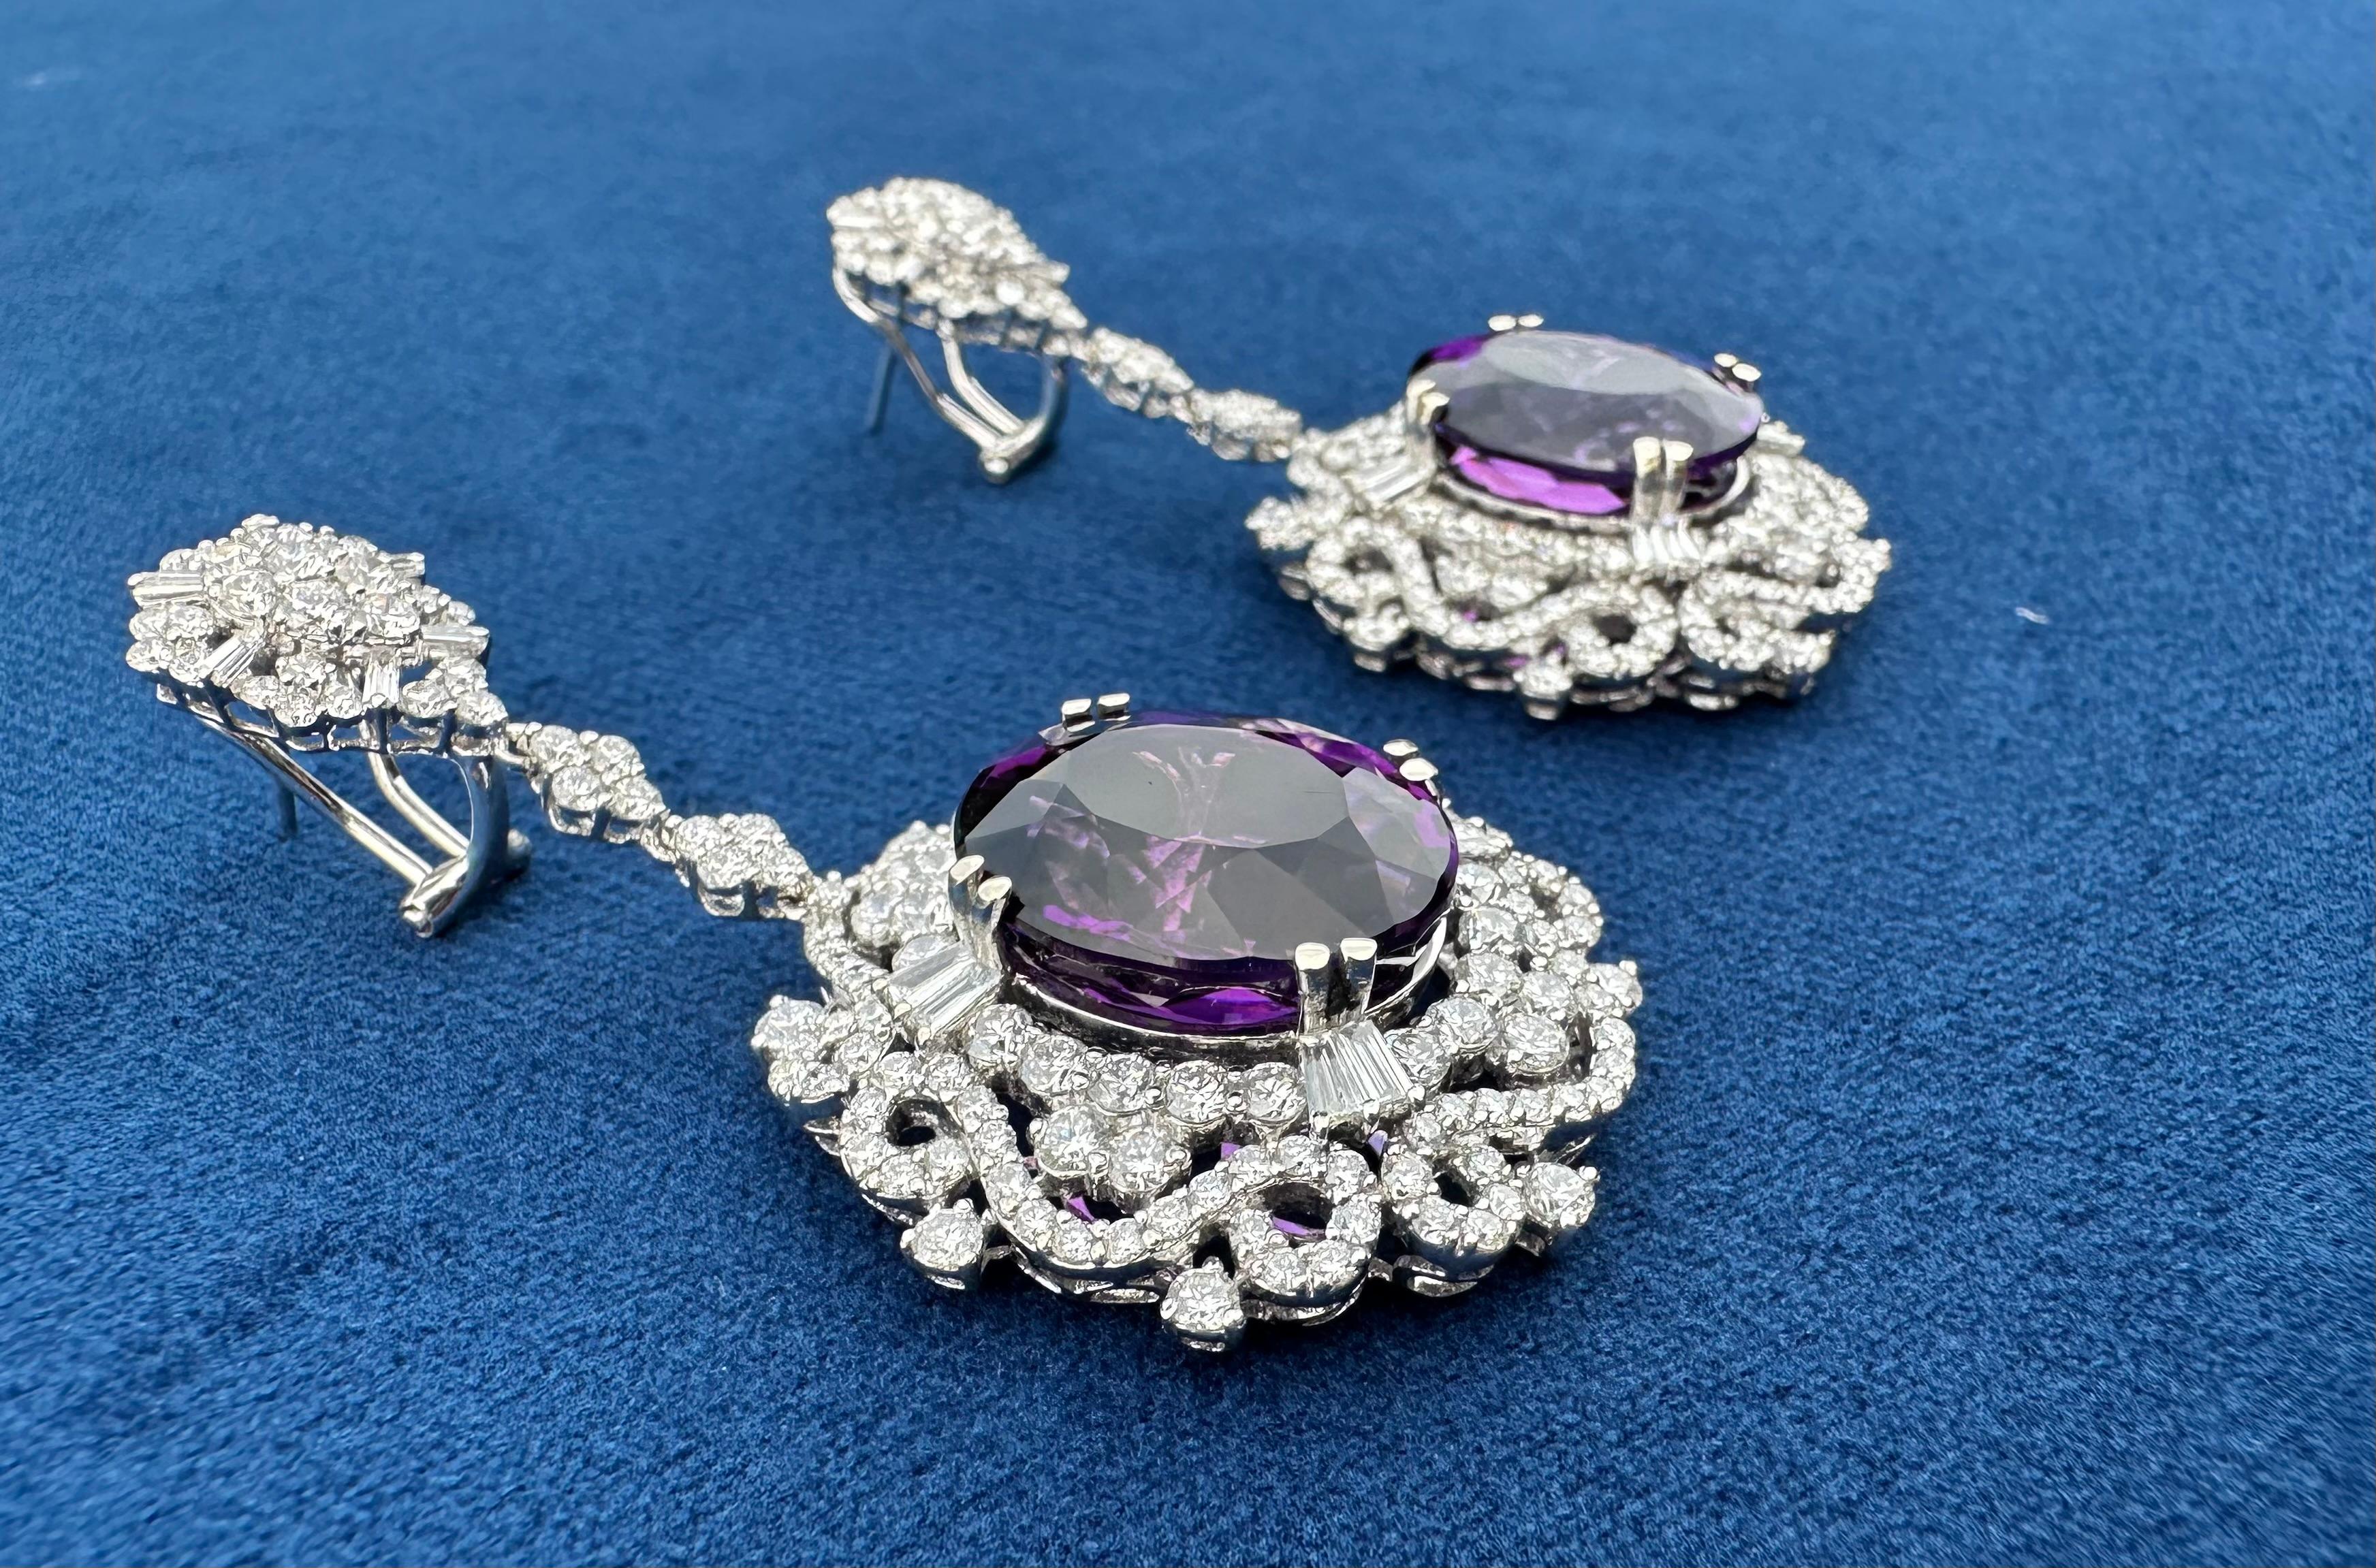 Women's Exquisite Pair of 42.49 Carat Amethyst and Diamond 18K White Gold Earrings For Sale